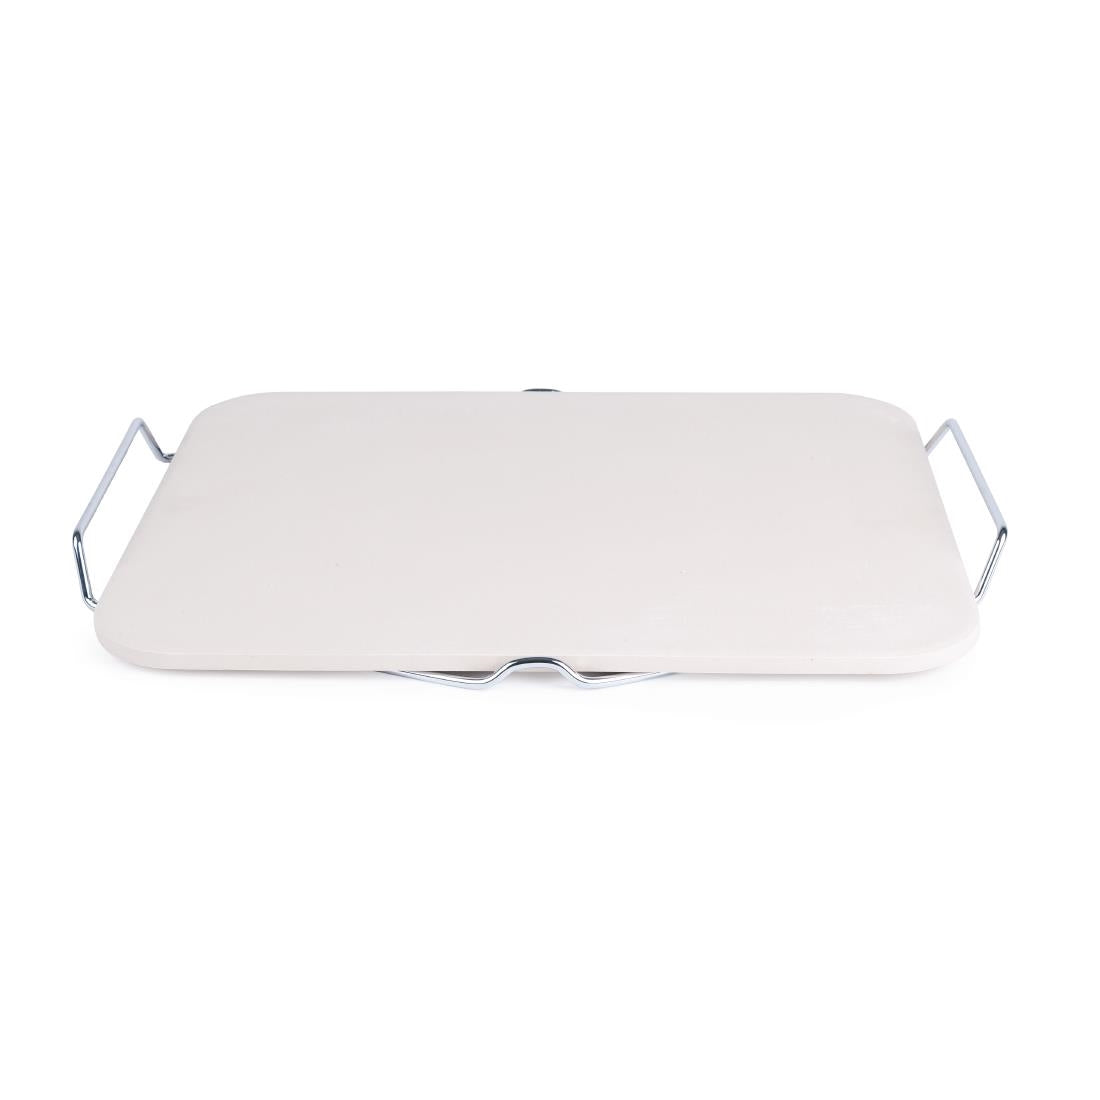 CL713 Rectangular Pizza Stone with Metal Serving Rack